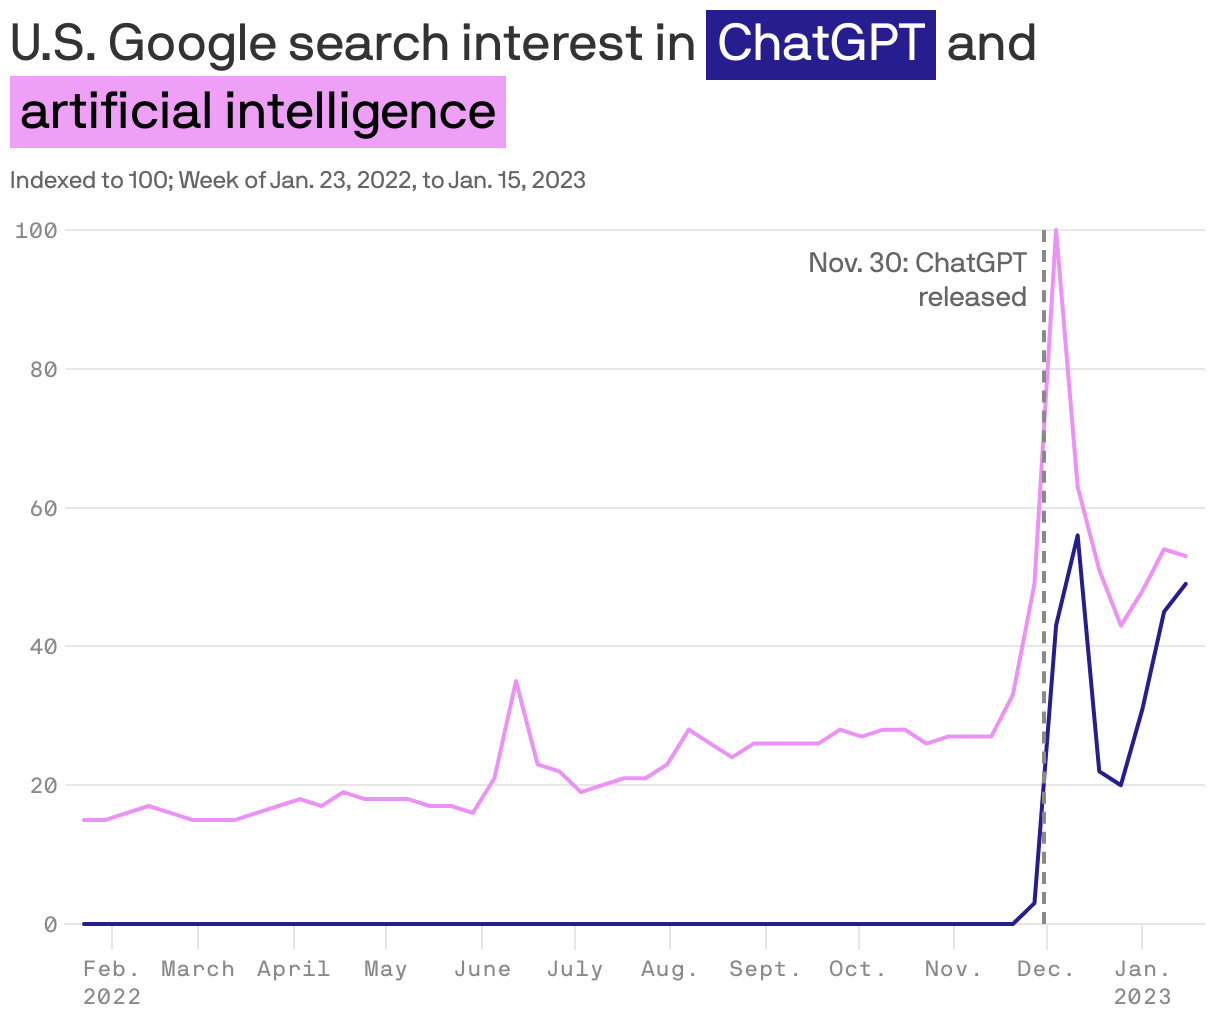 U.S. Google search interest in <span style="background:#261e8e; color: white; padding: 5px;">ChatGPT</span> and <span style="background:#EDA0F5; color: black; padding: 5px;">artificial intelligence</span>